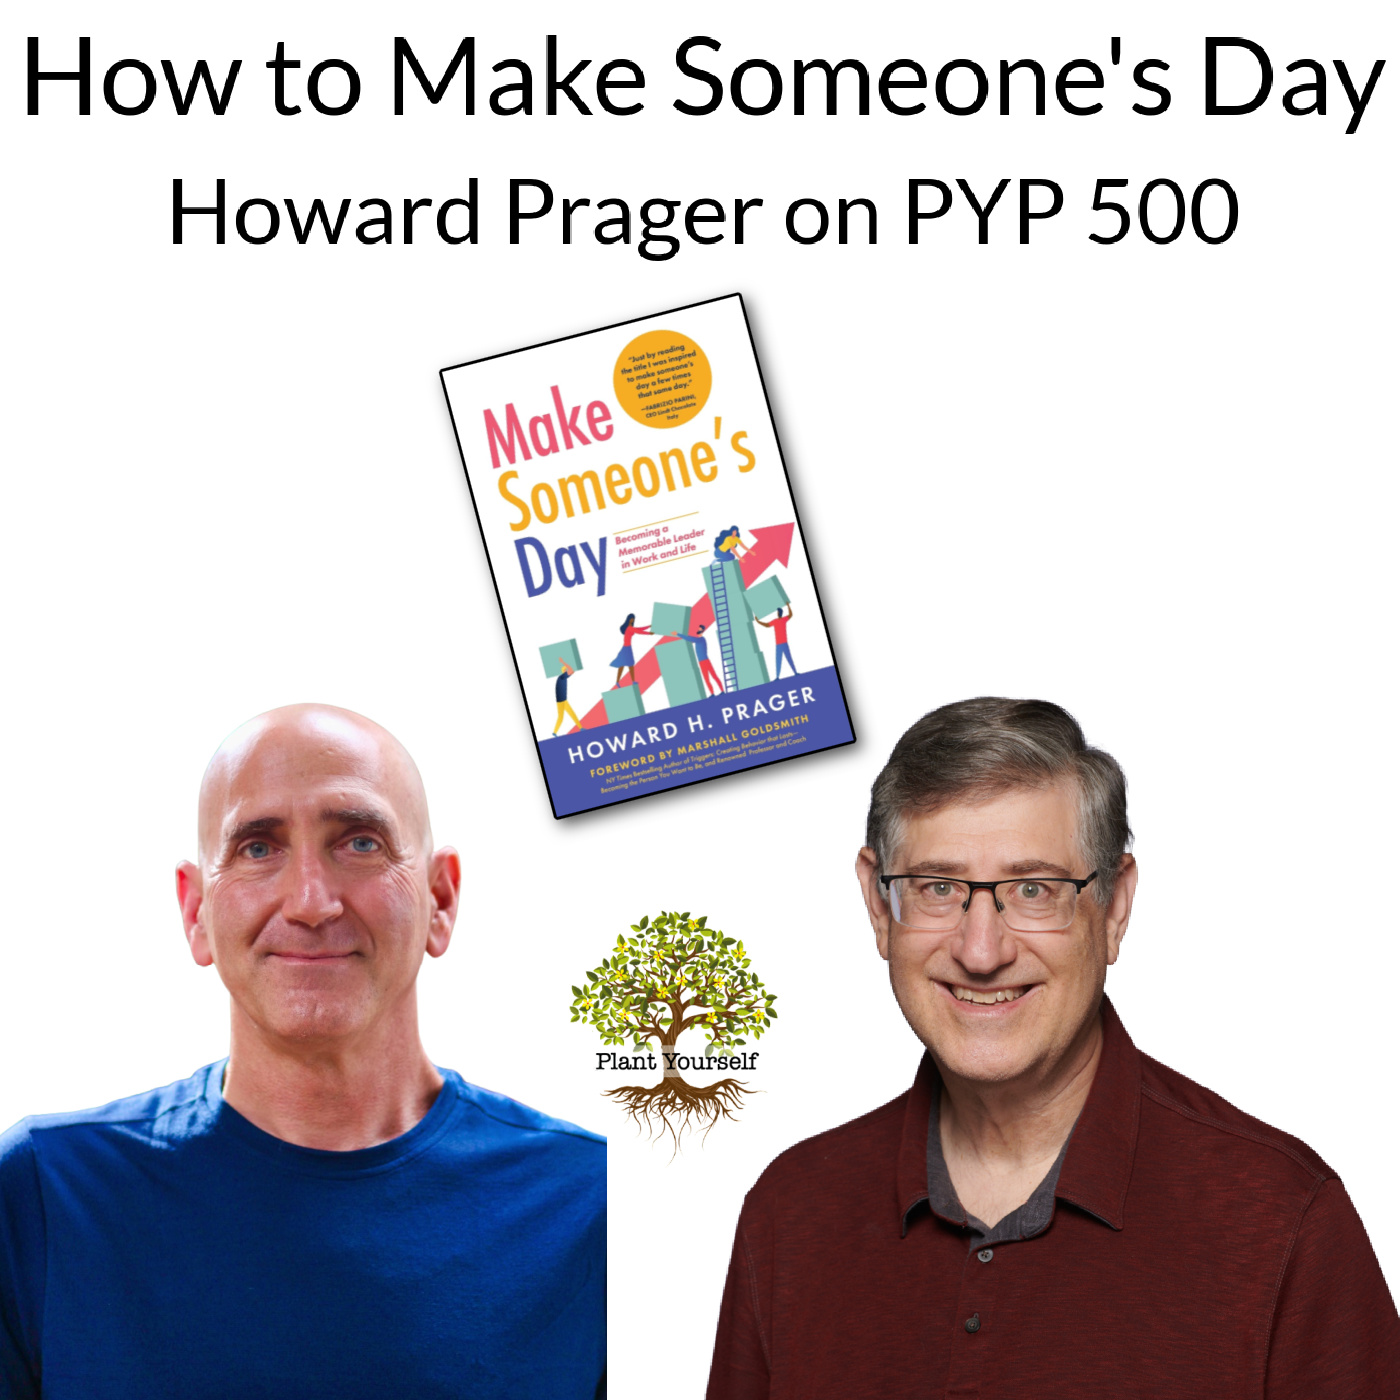 How to Make Someone's Day: Howard Prager on PYP 500